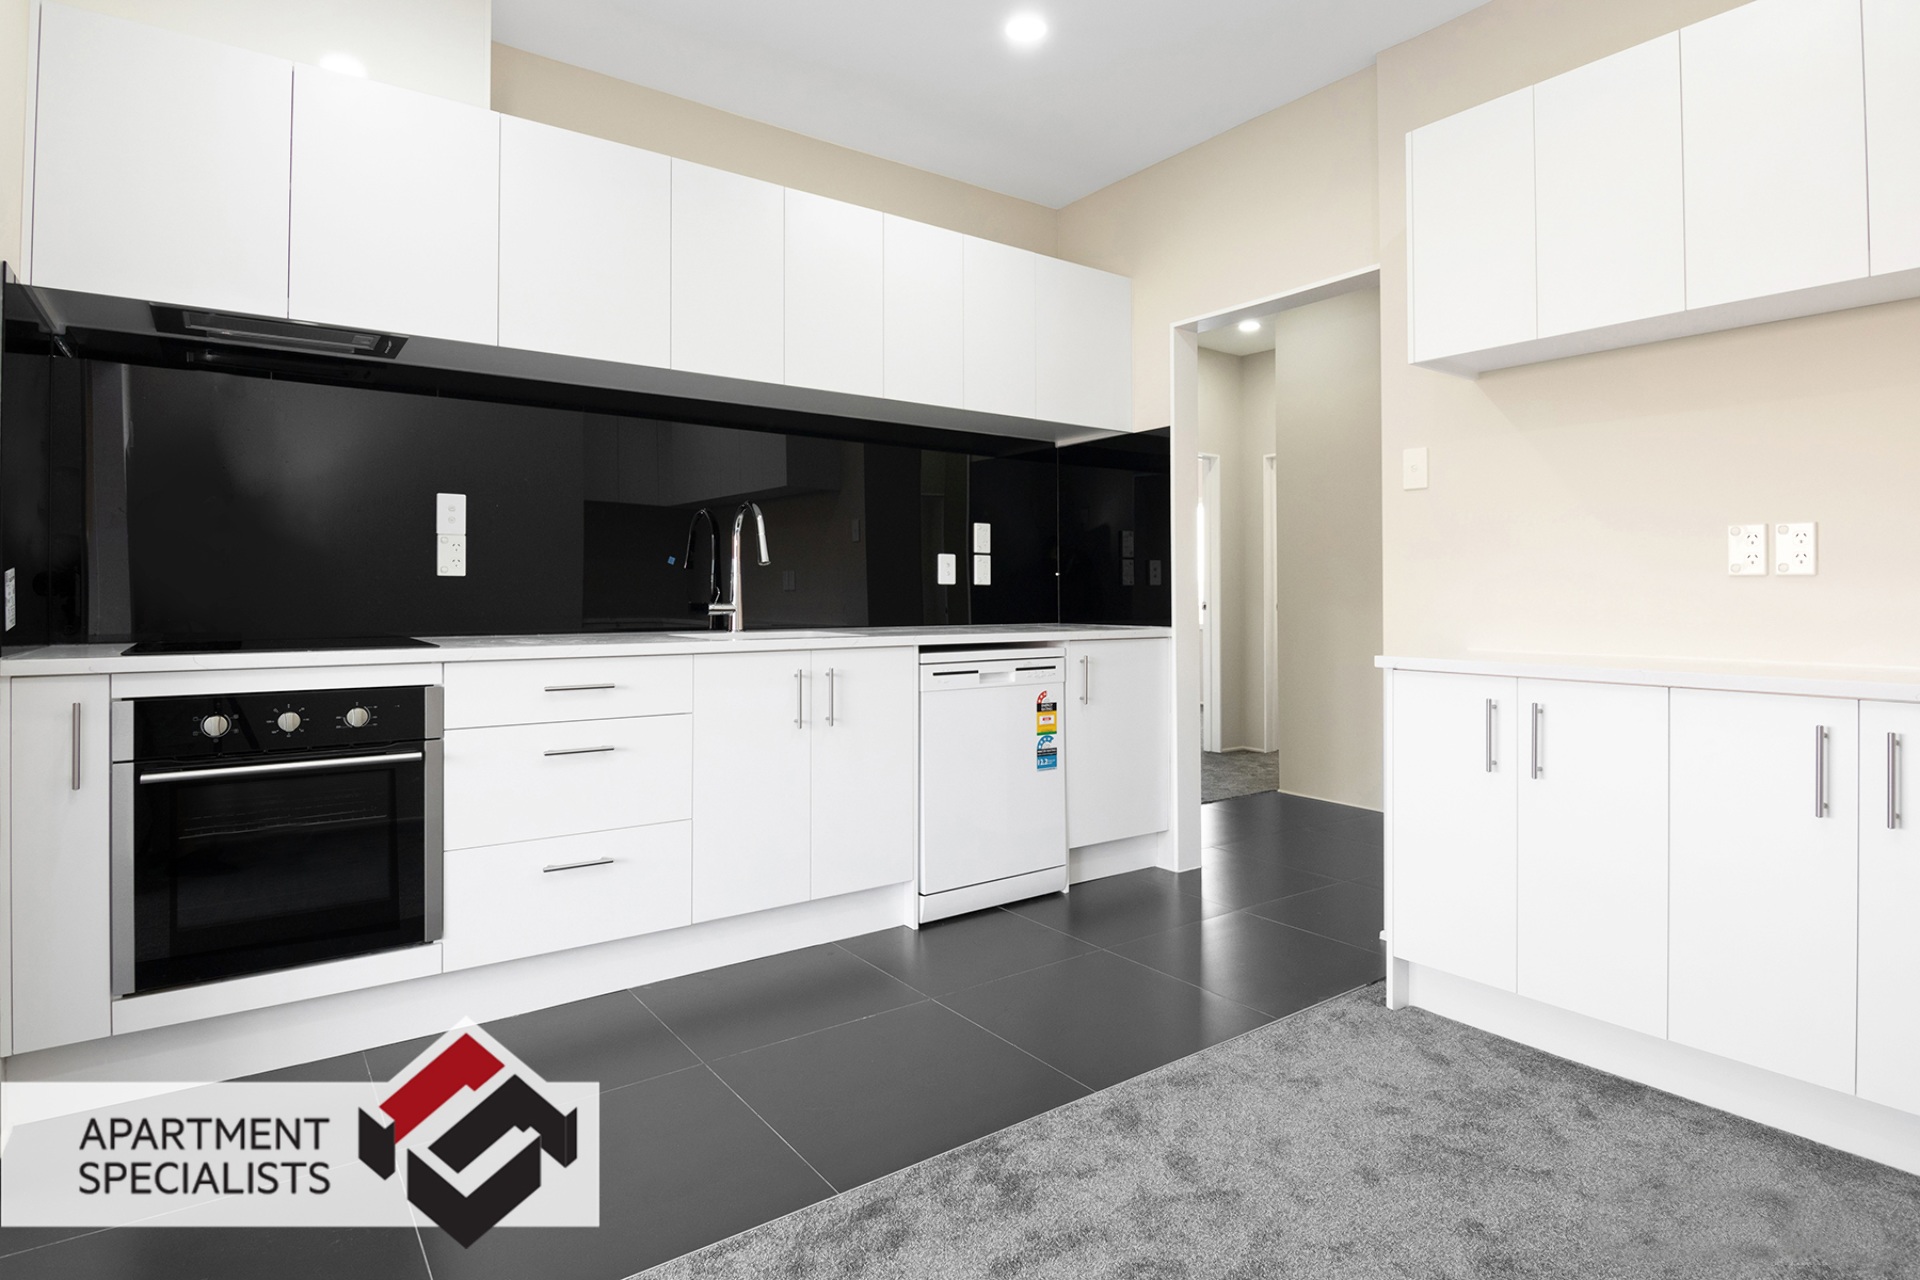 4 | 325 Mount Albert Road, Mount Roskill | Apartment Specialists